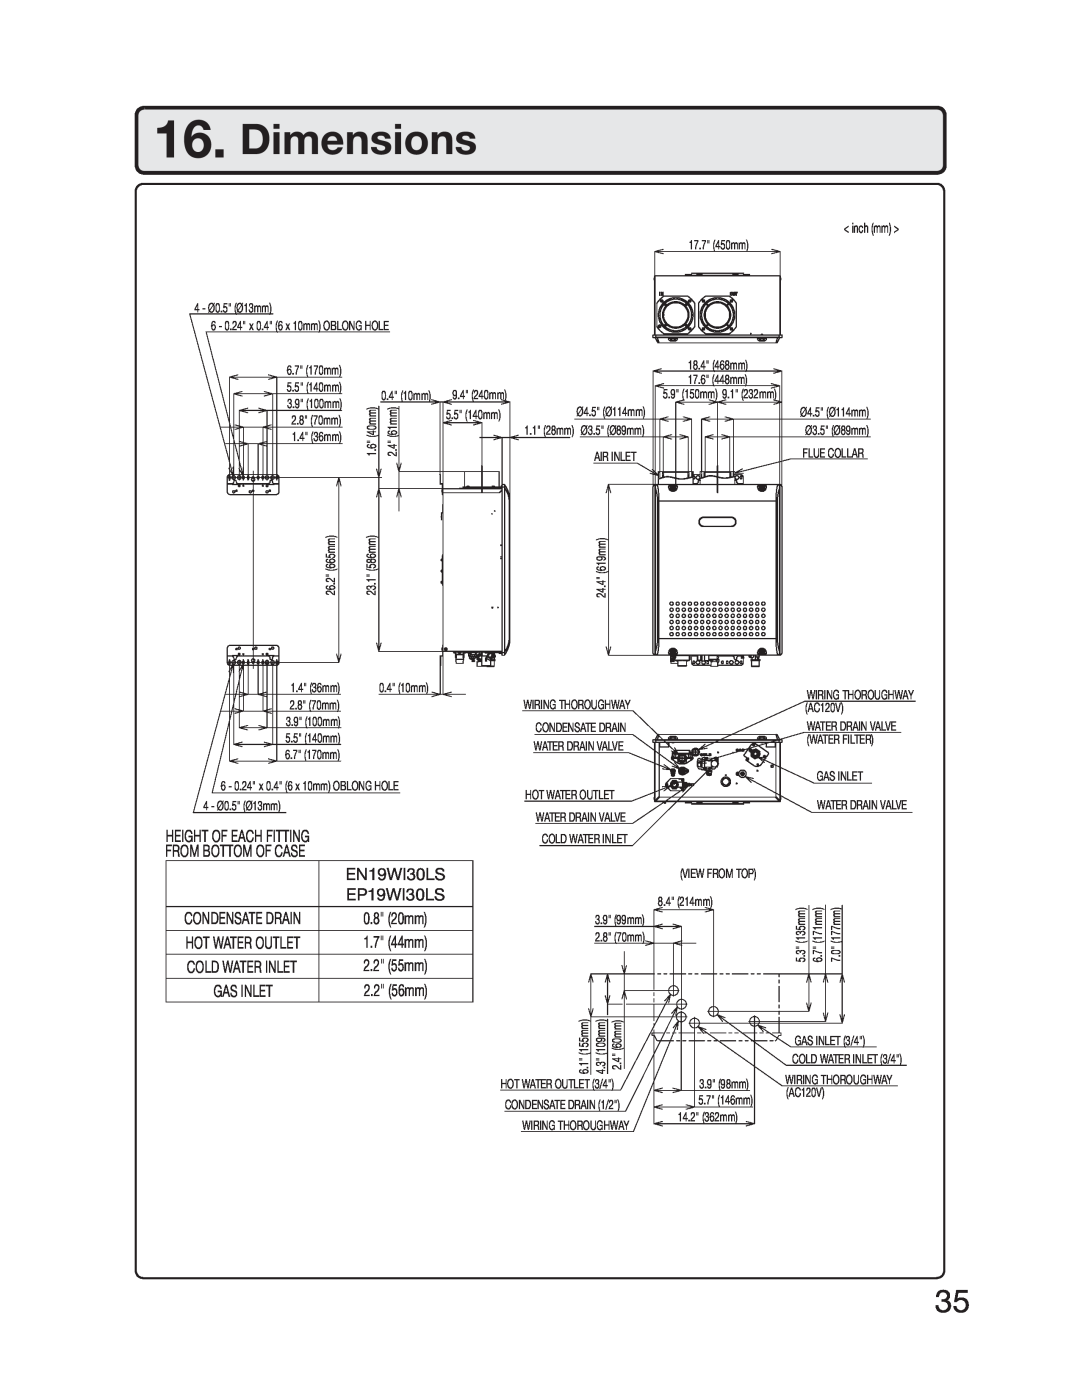 Electrolux 5995615357 installation manual Dimensions, EP19WI30LS 